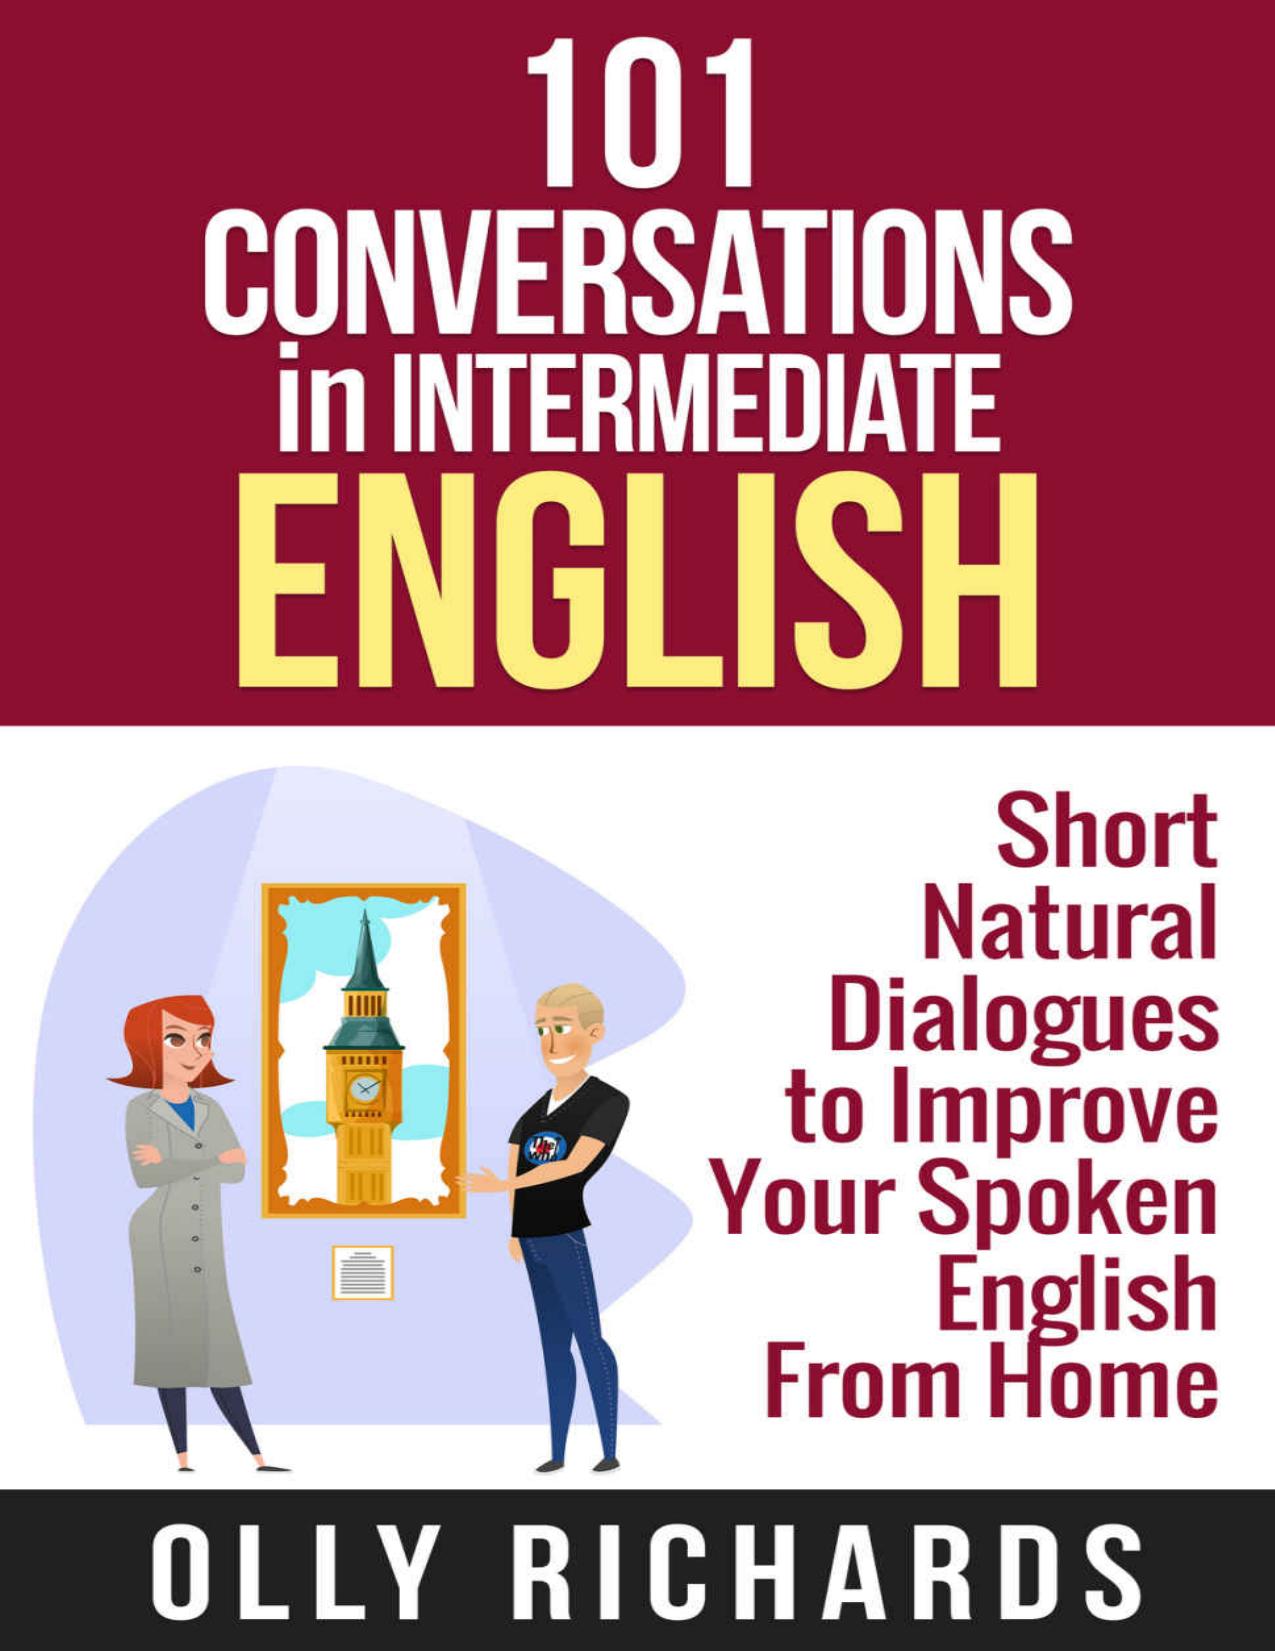 101 Conversations in Intermediate English: Short Natural Dialogues to Boost Your Confidence & Improve Your Spoken English (101 Conversations in English Book 2) by Olly Richards